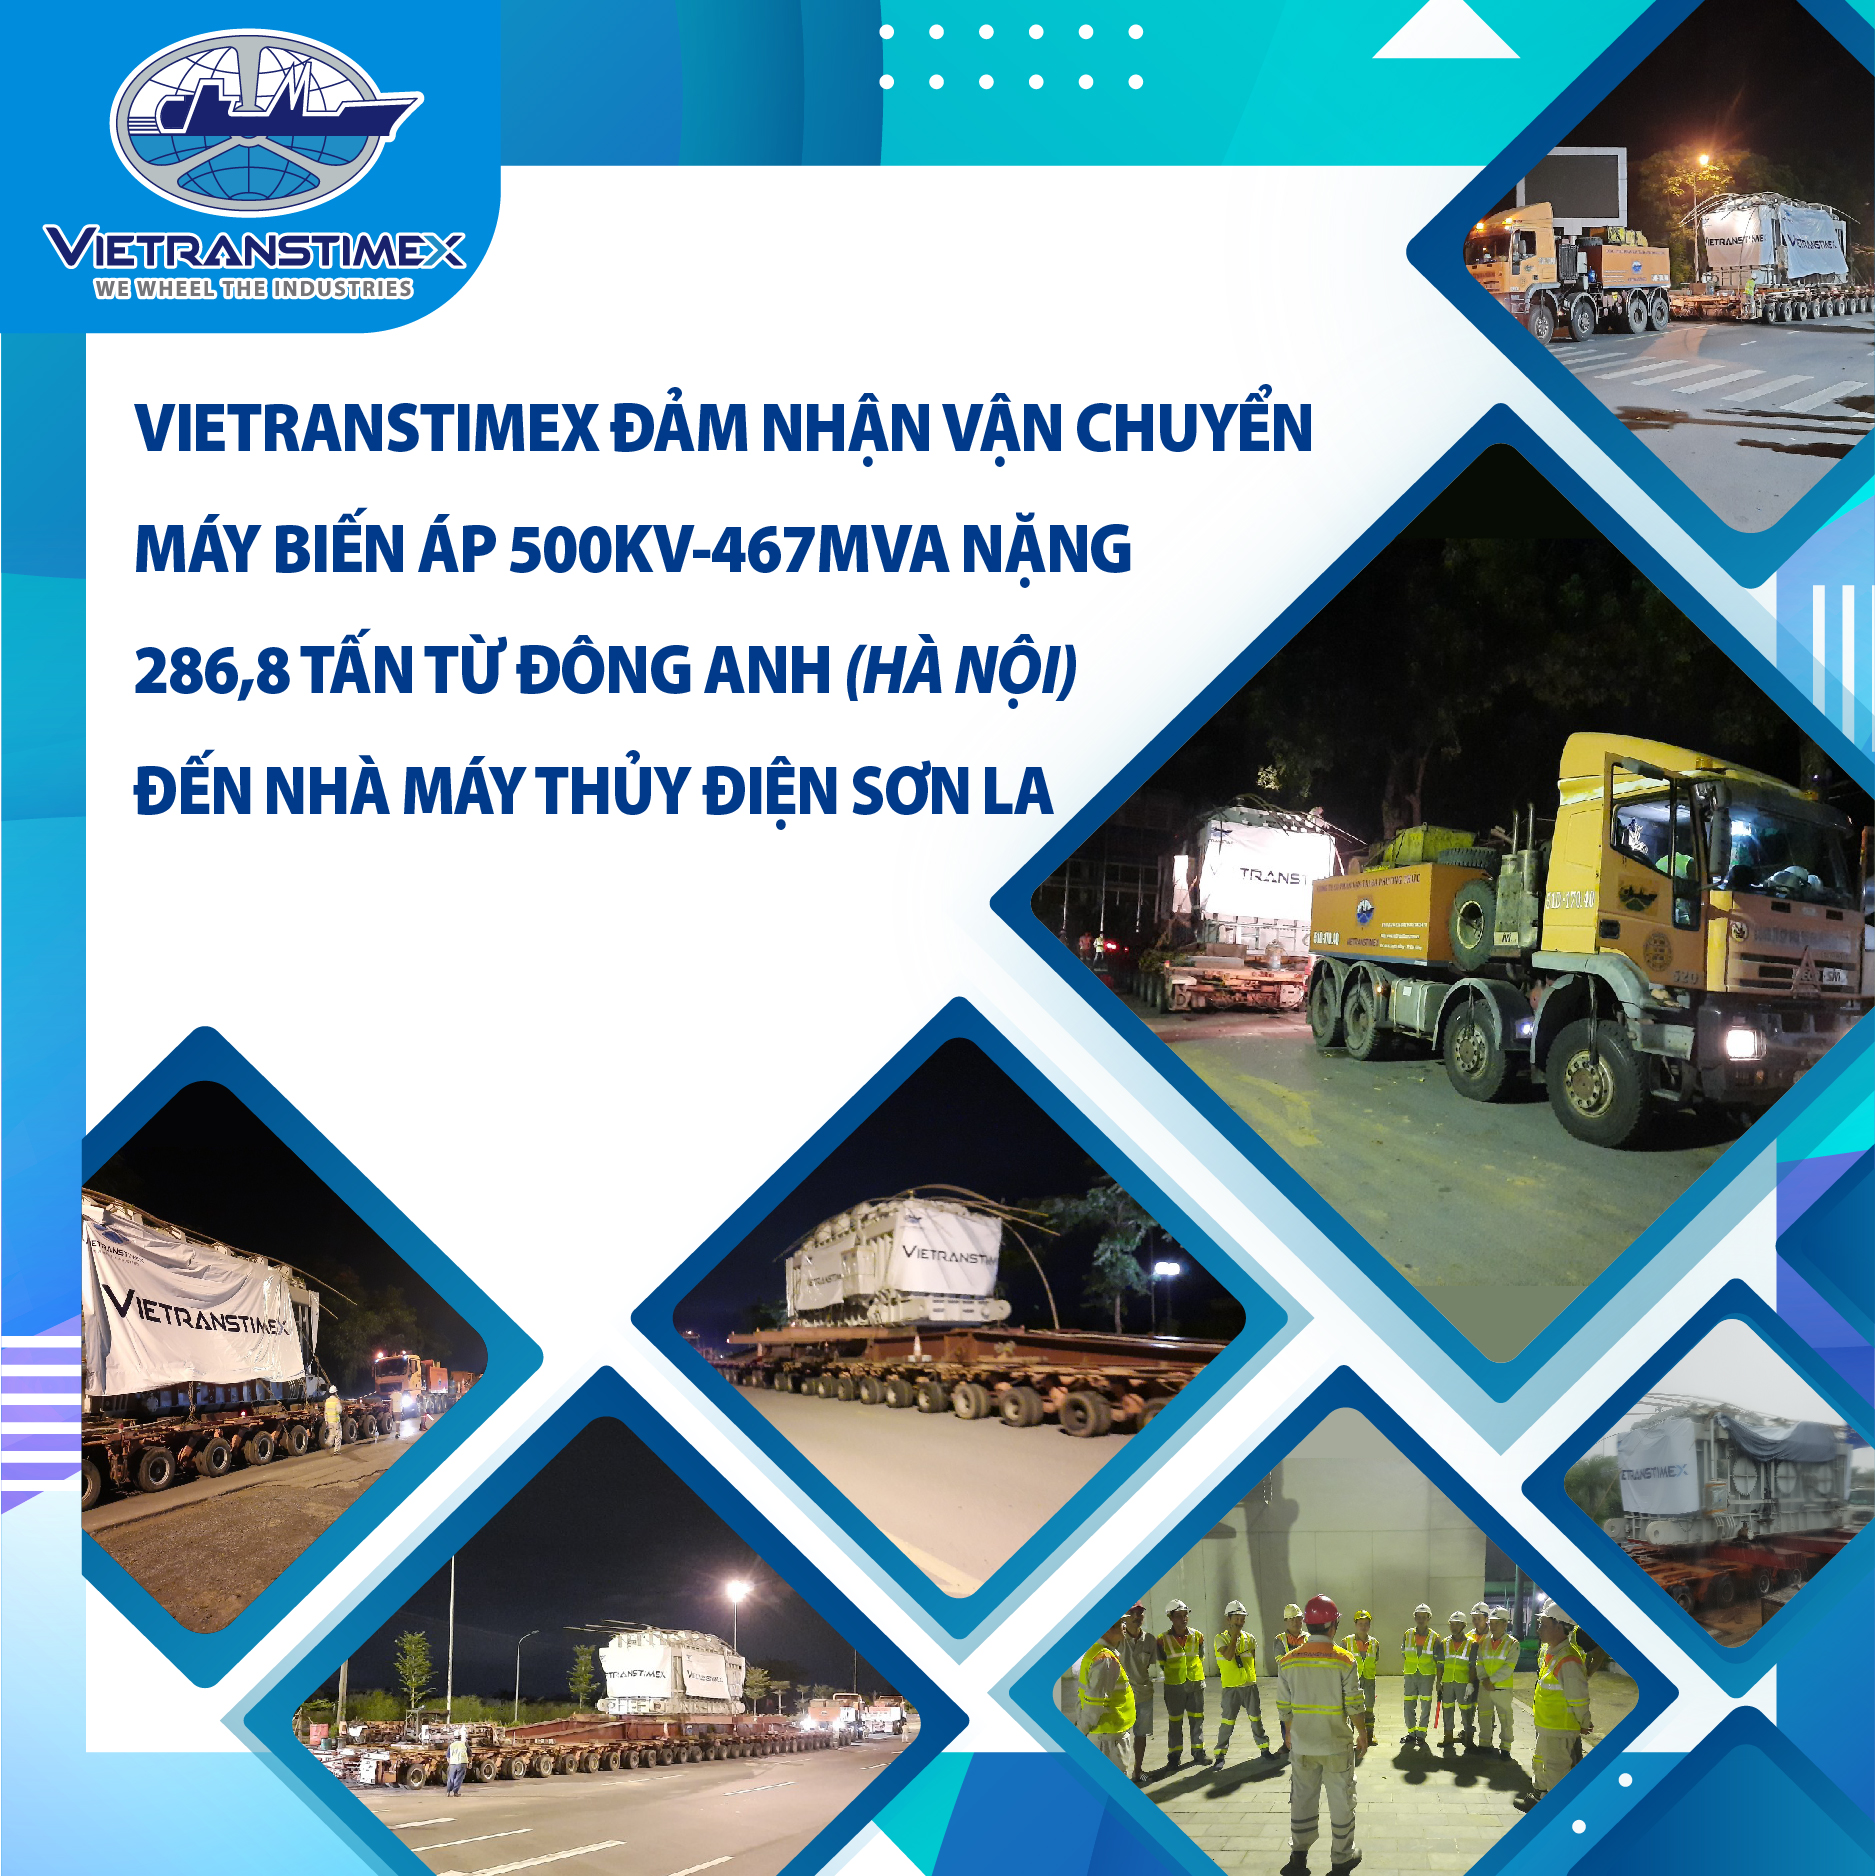 Vietranstimex Received And Transported The 500kV-467MVA Transformer Weighing 286.8 Tons From Dong Anh (Hanoi) To Son La Hydropower Plant